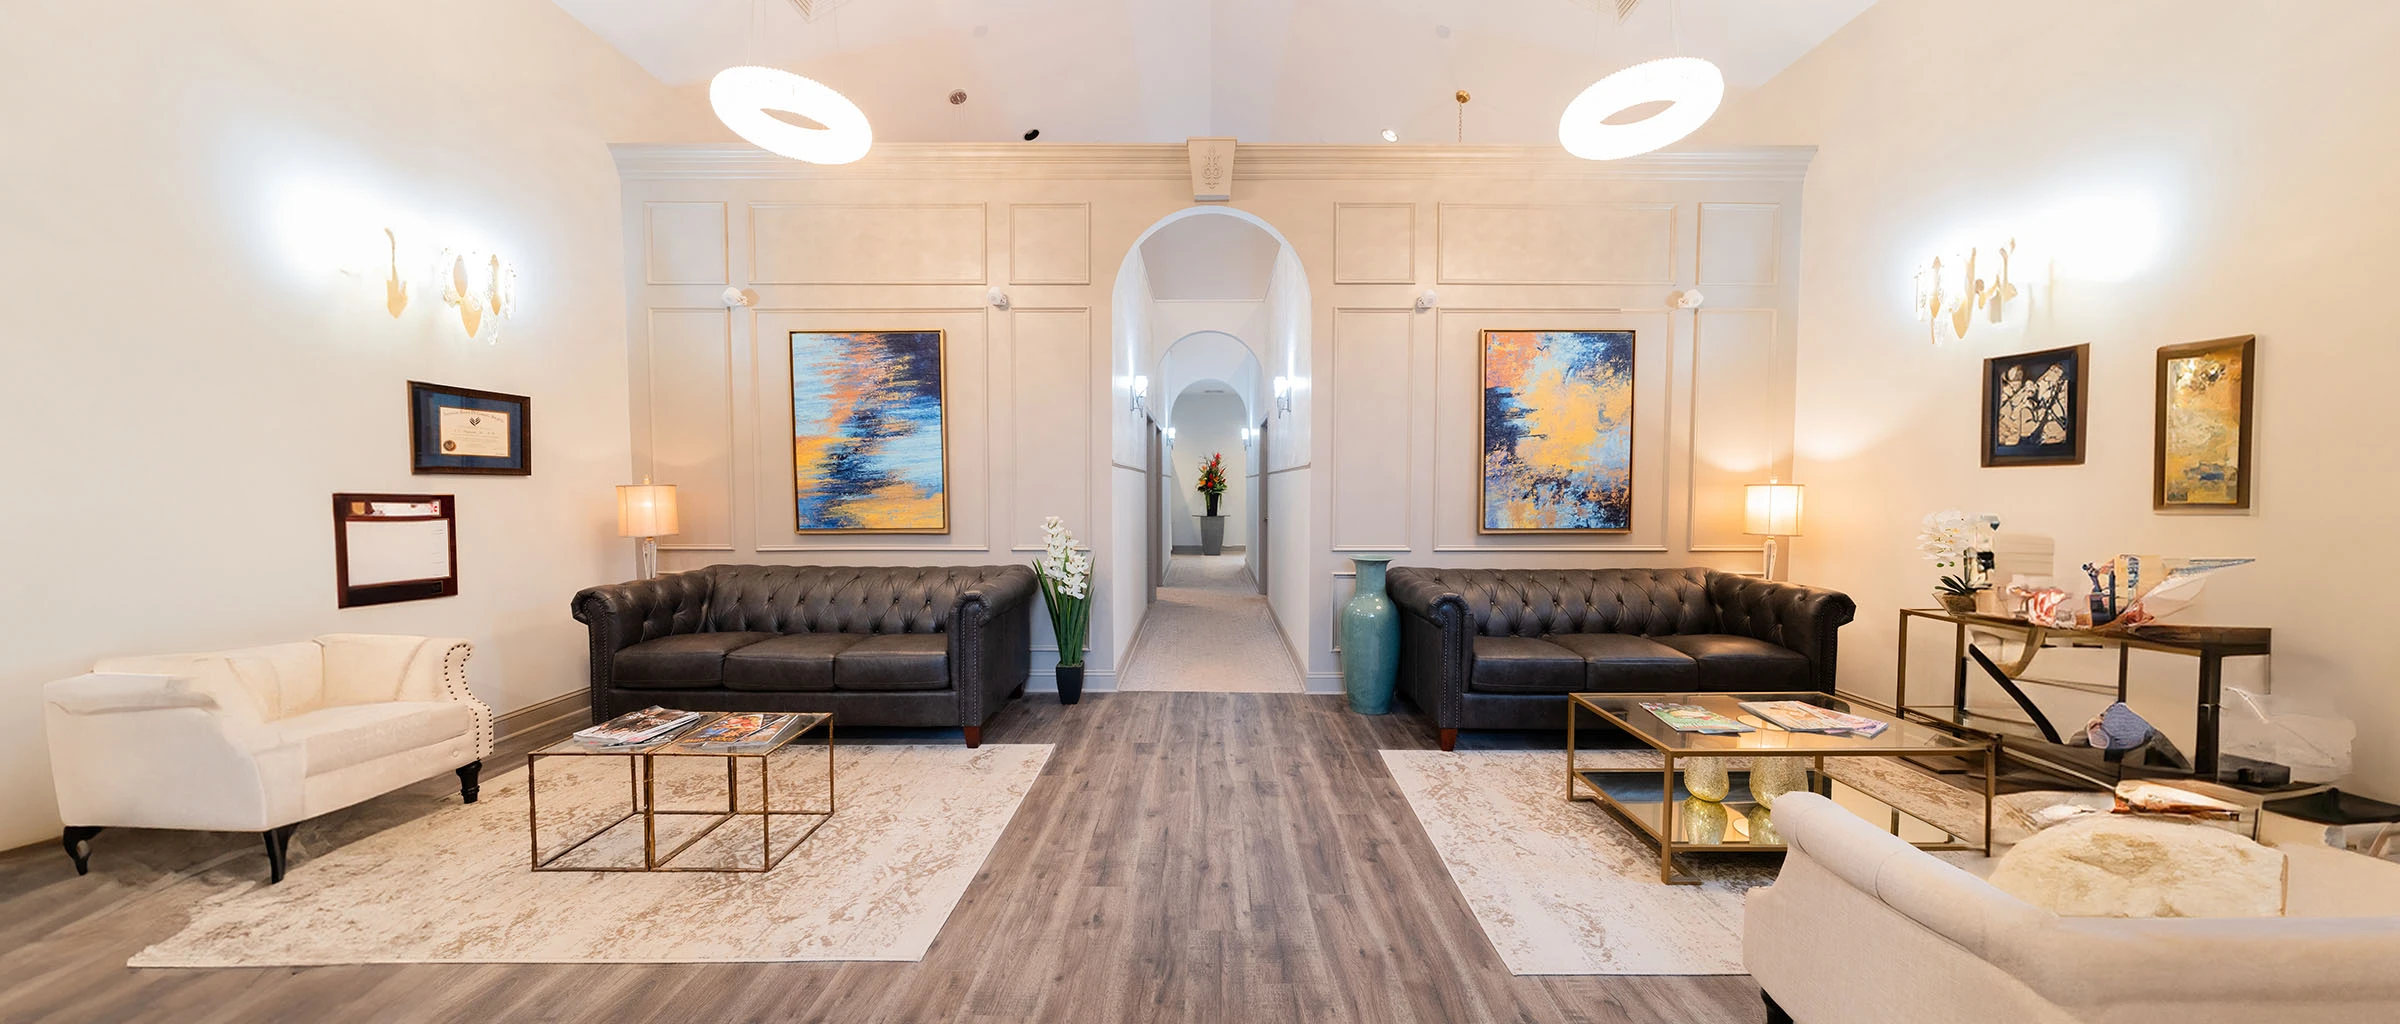 interior show of the practice | Ingram Cosmetic Surgery Nashville